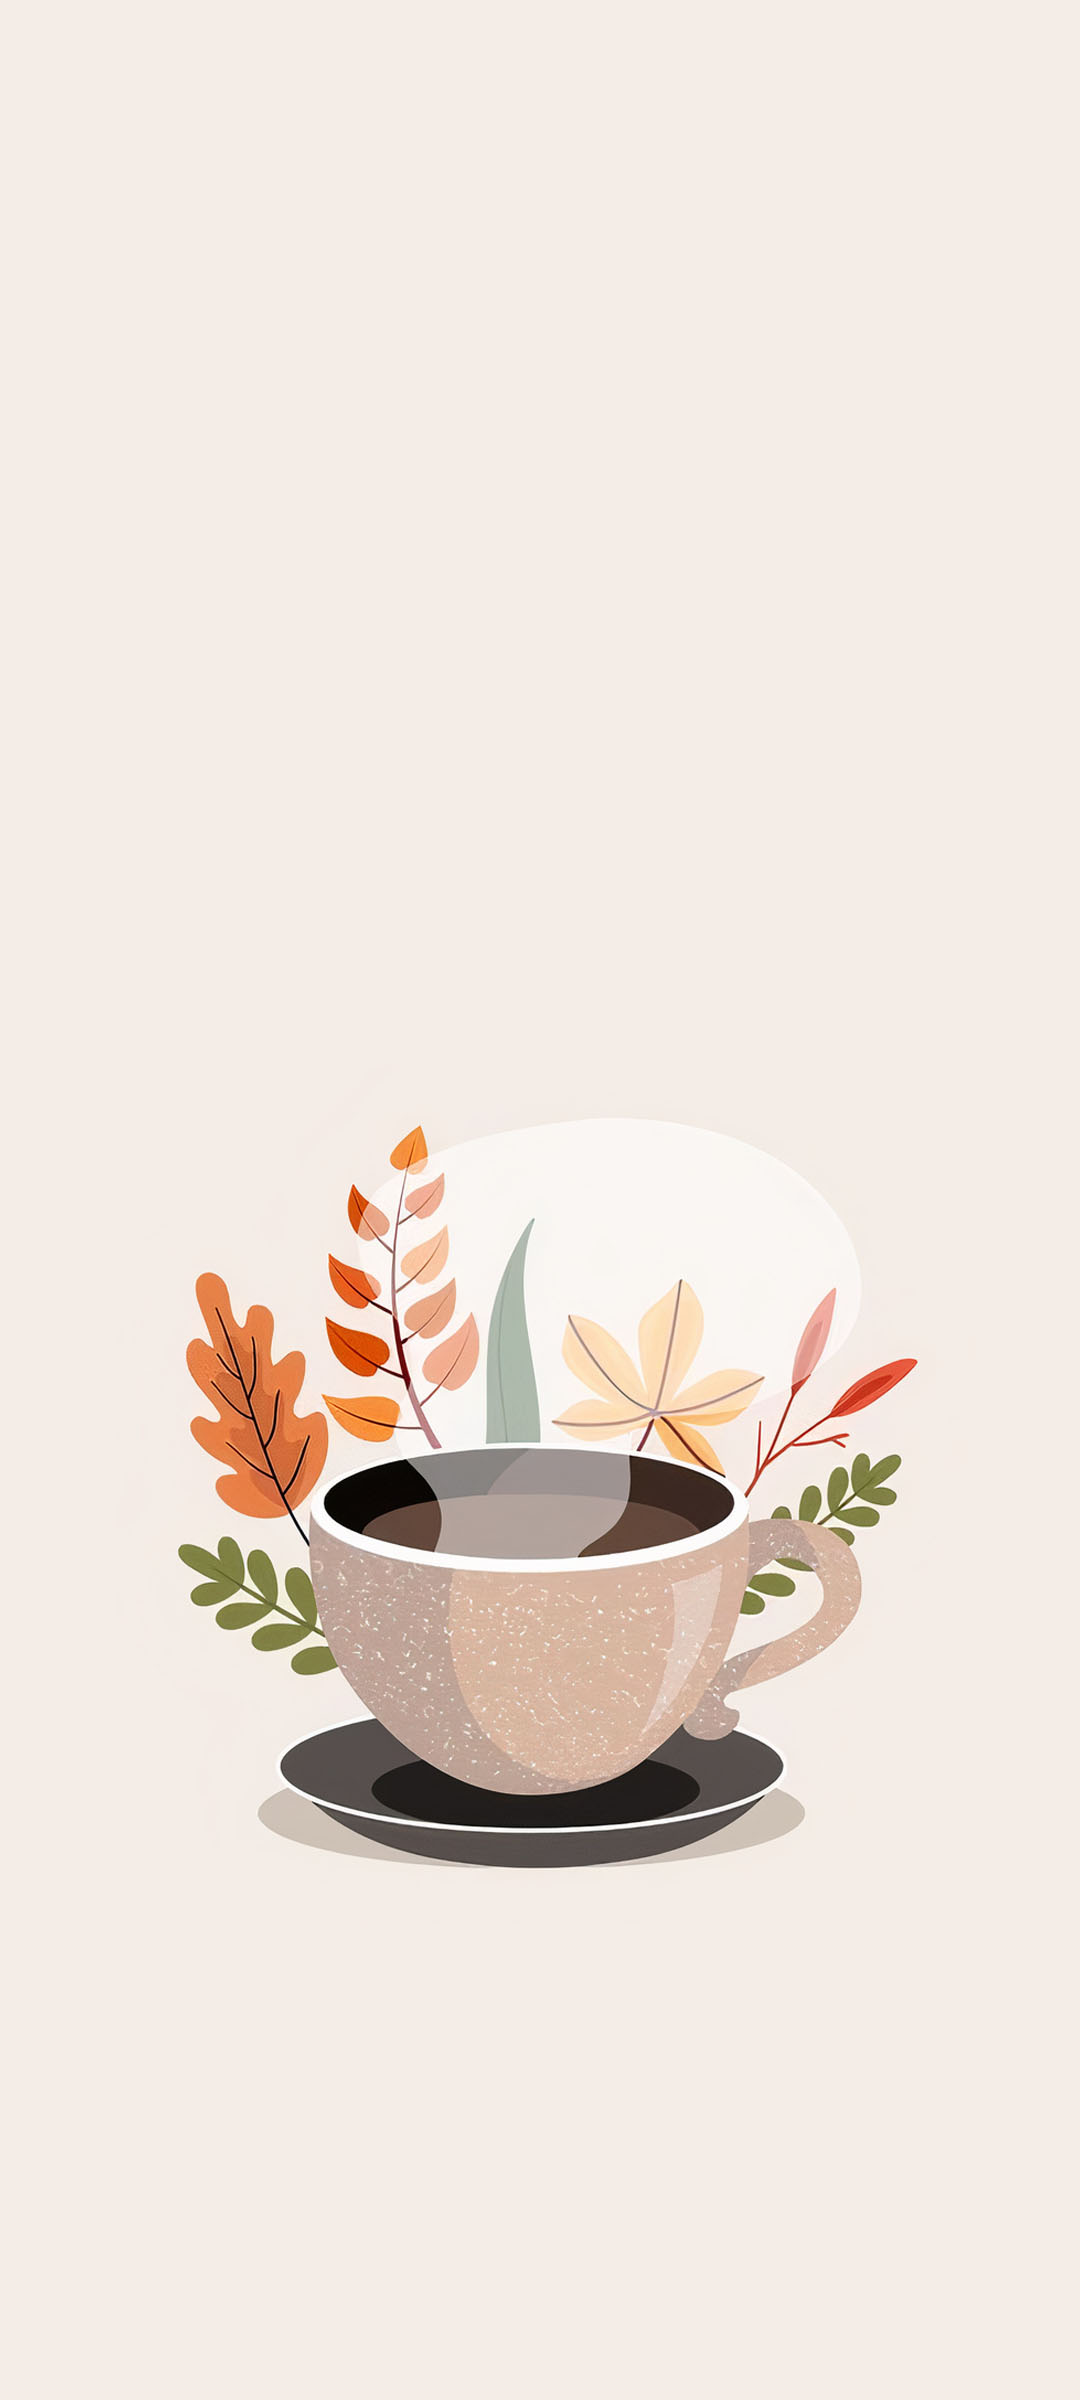 A cup of coffee with leaves around it - Coffee